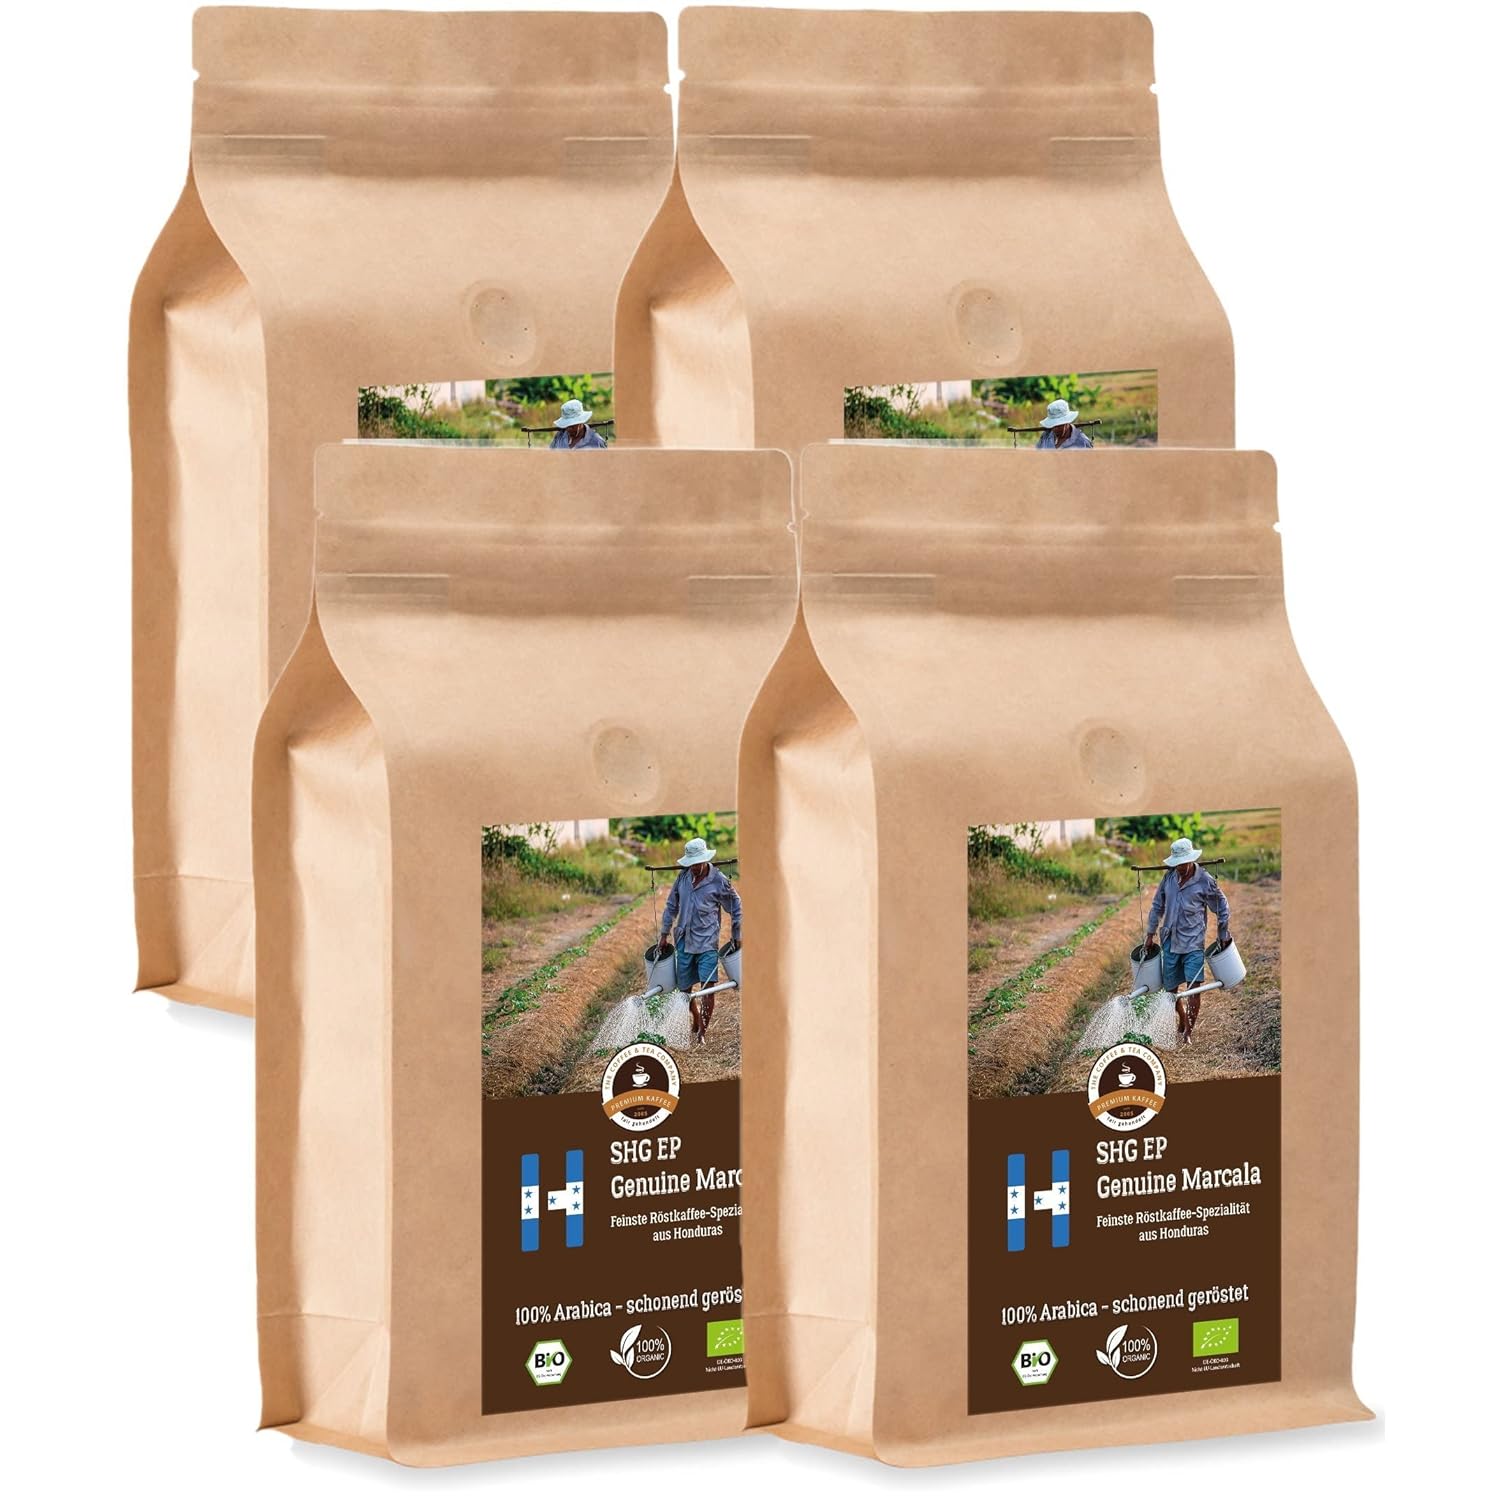 Coffee Globetrotter - Organic Honduras Genuine Marcala - 4 x 1000 g Whole Bean - for Fully Automatic Coffee Machine, Coffee Grinder - Roasted Coffee from Organic Cultivation | Gastropack Economy Pack